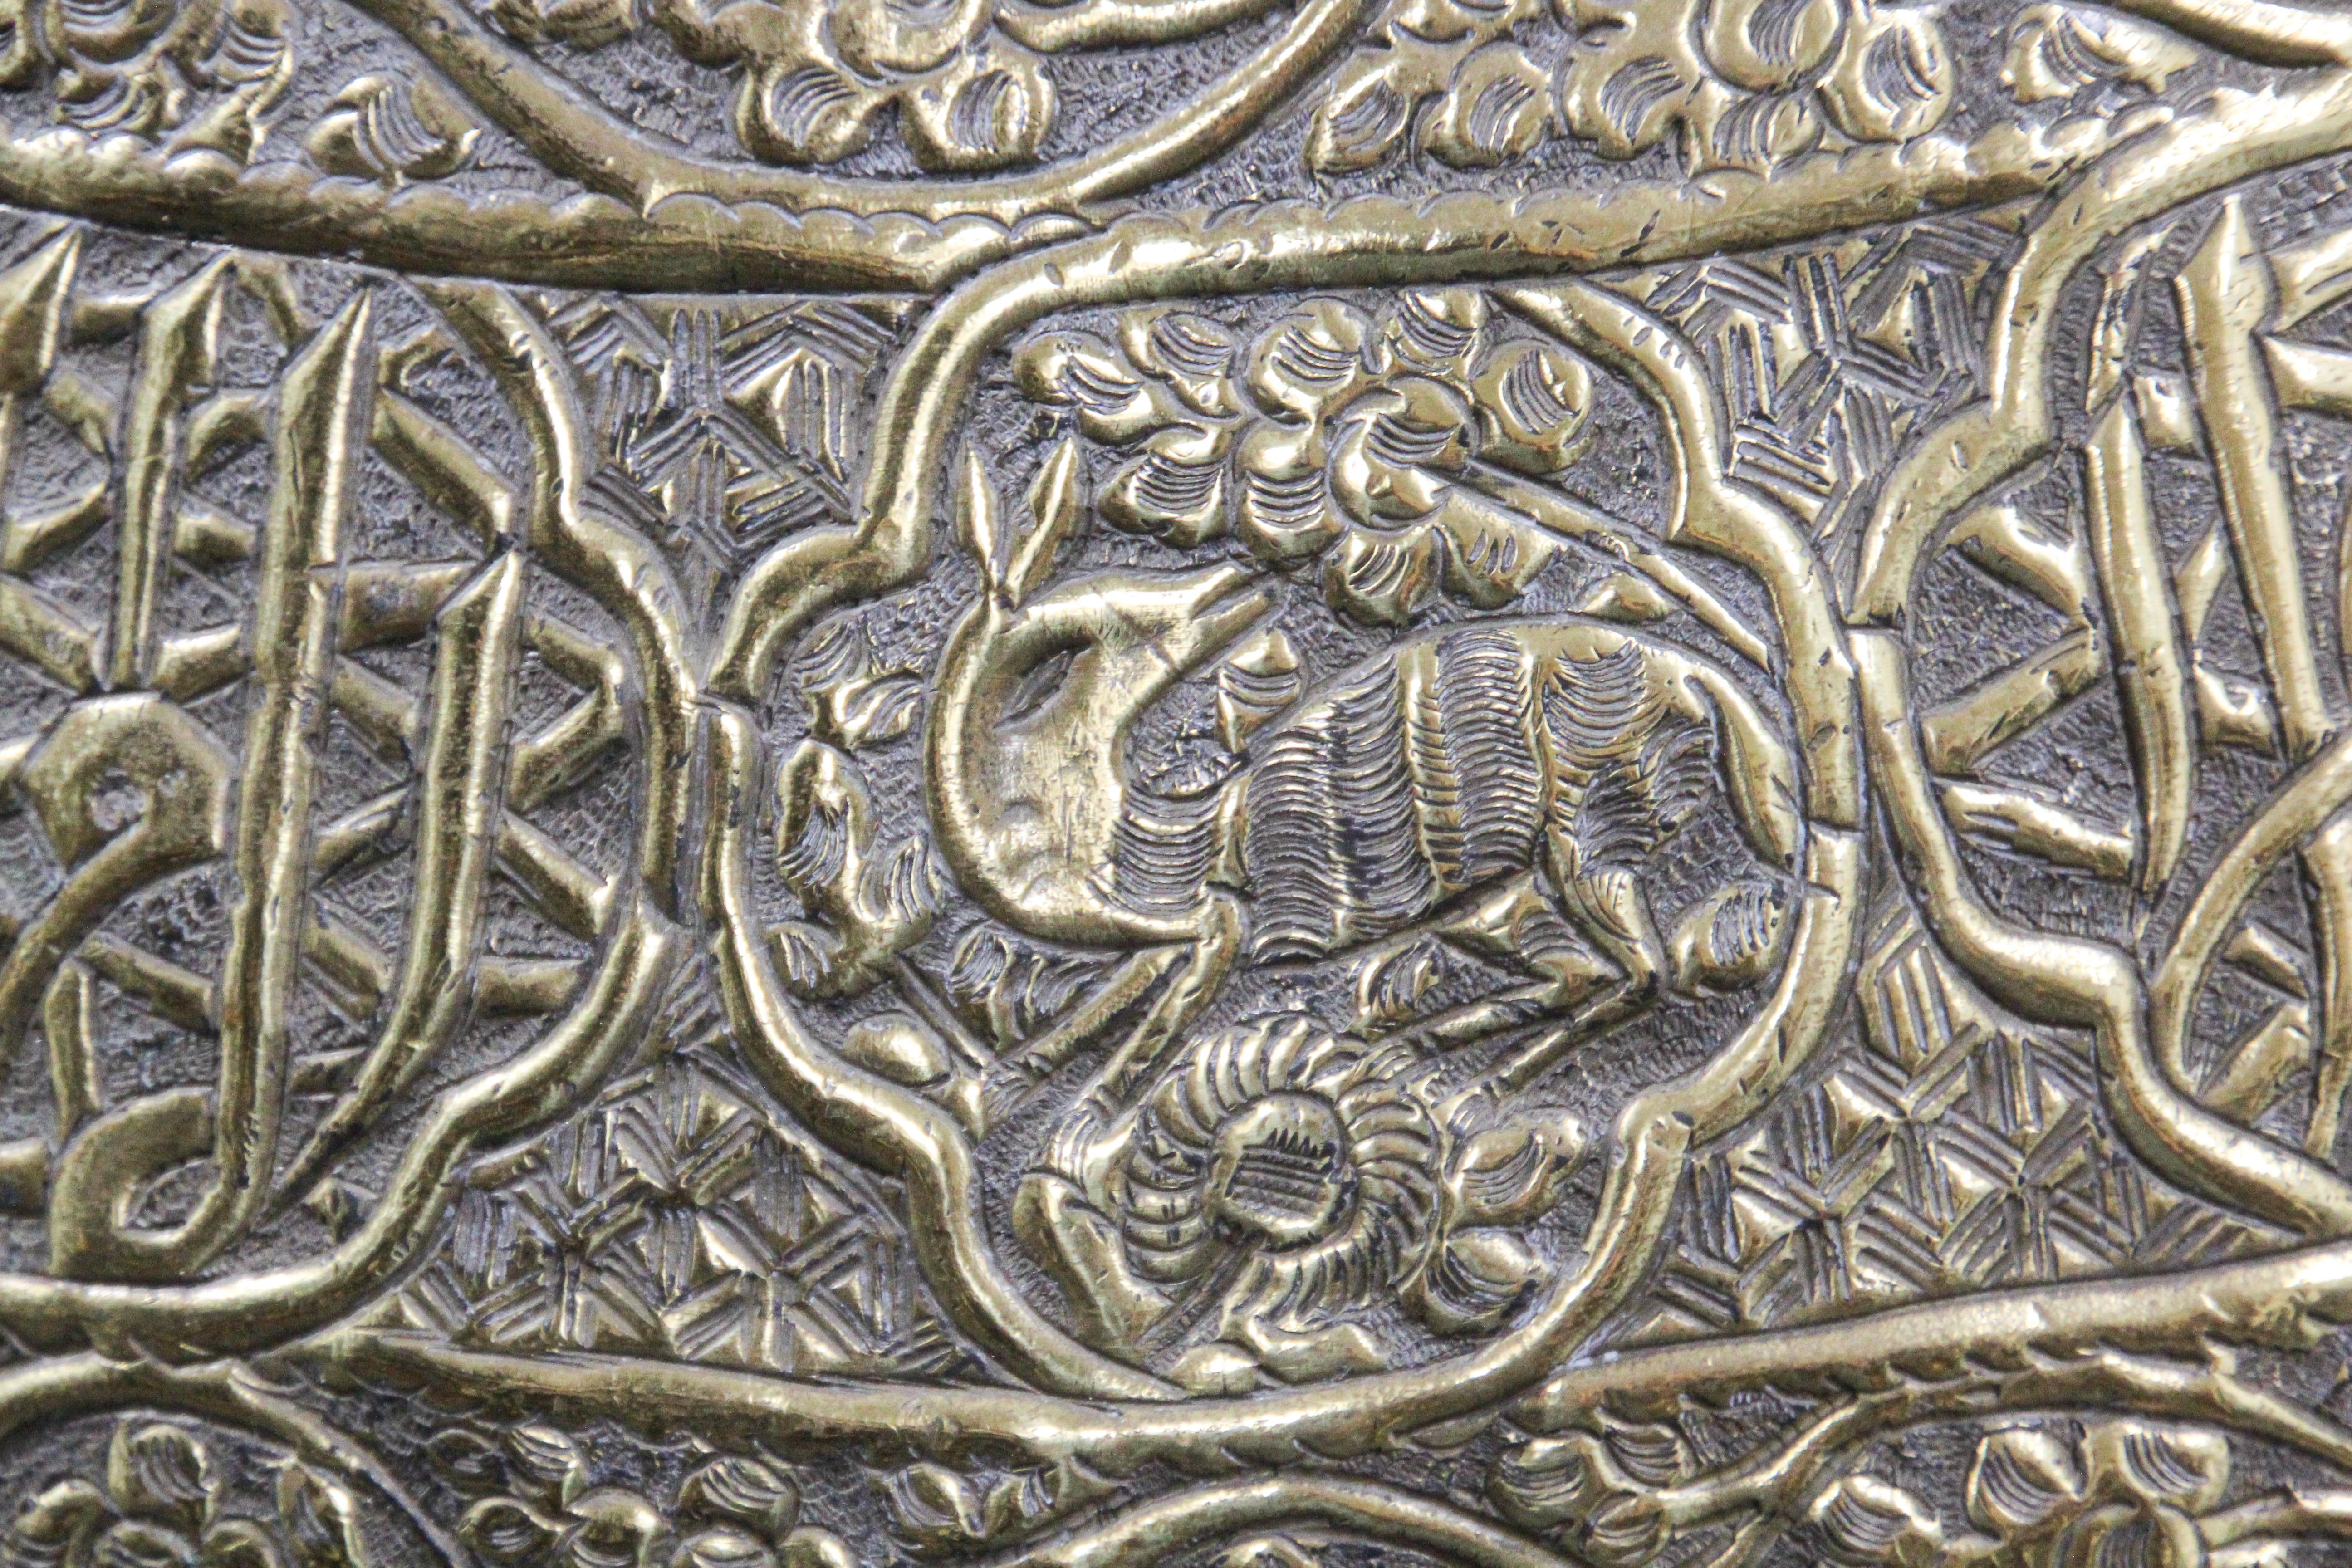 Islamic Middle Eastern Brass Bowl with Arabic Calligraphy Writing For Sale